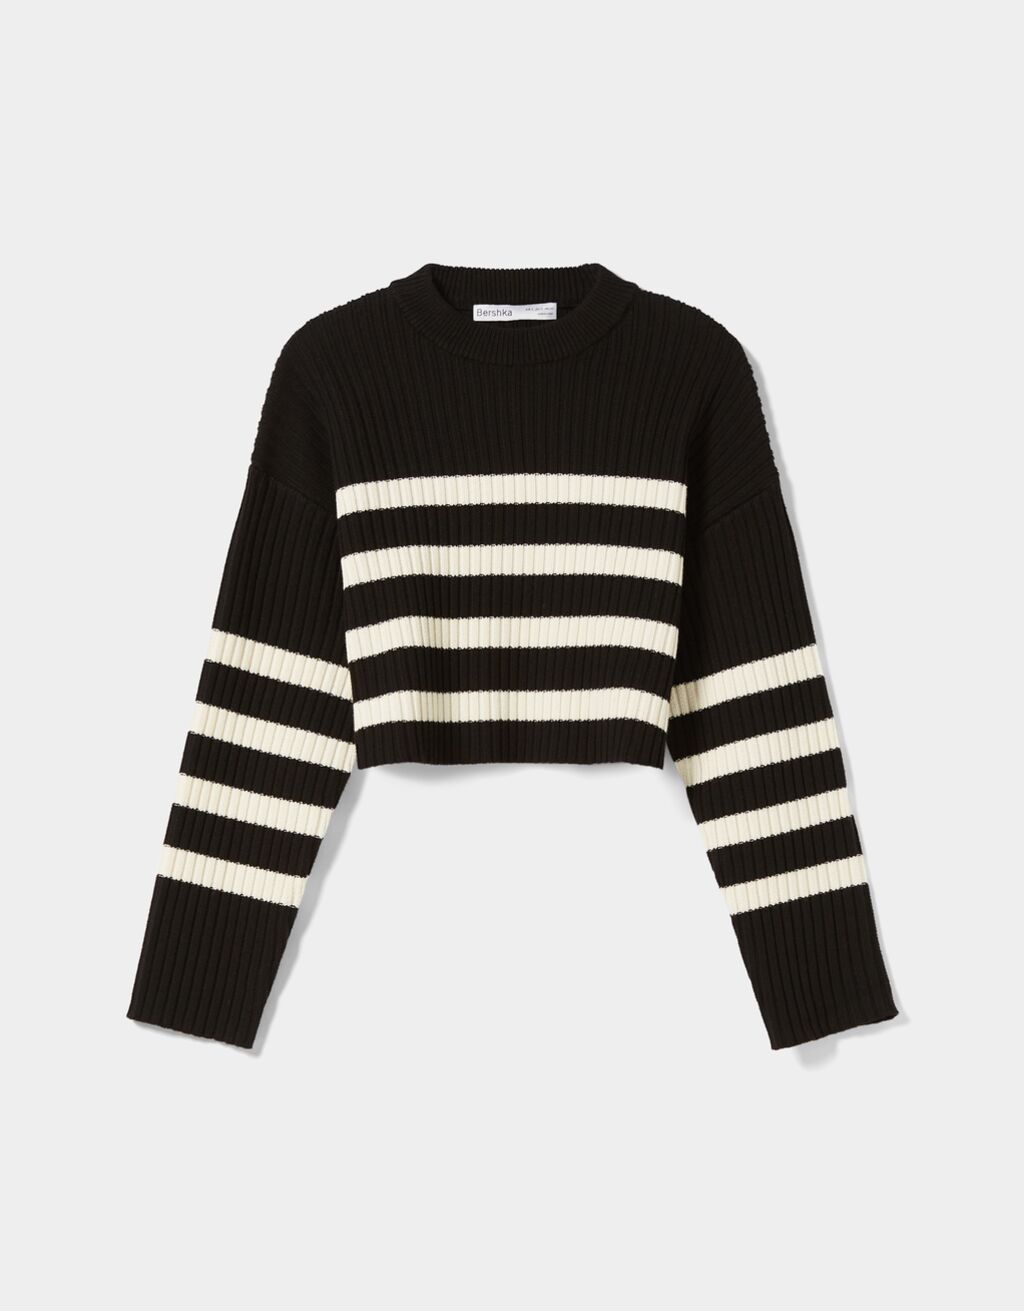 Crew neck ribbed striped sweater